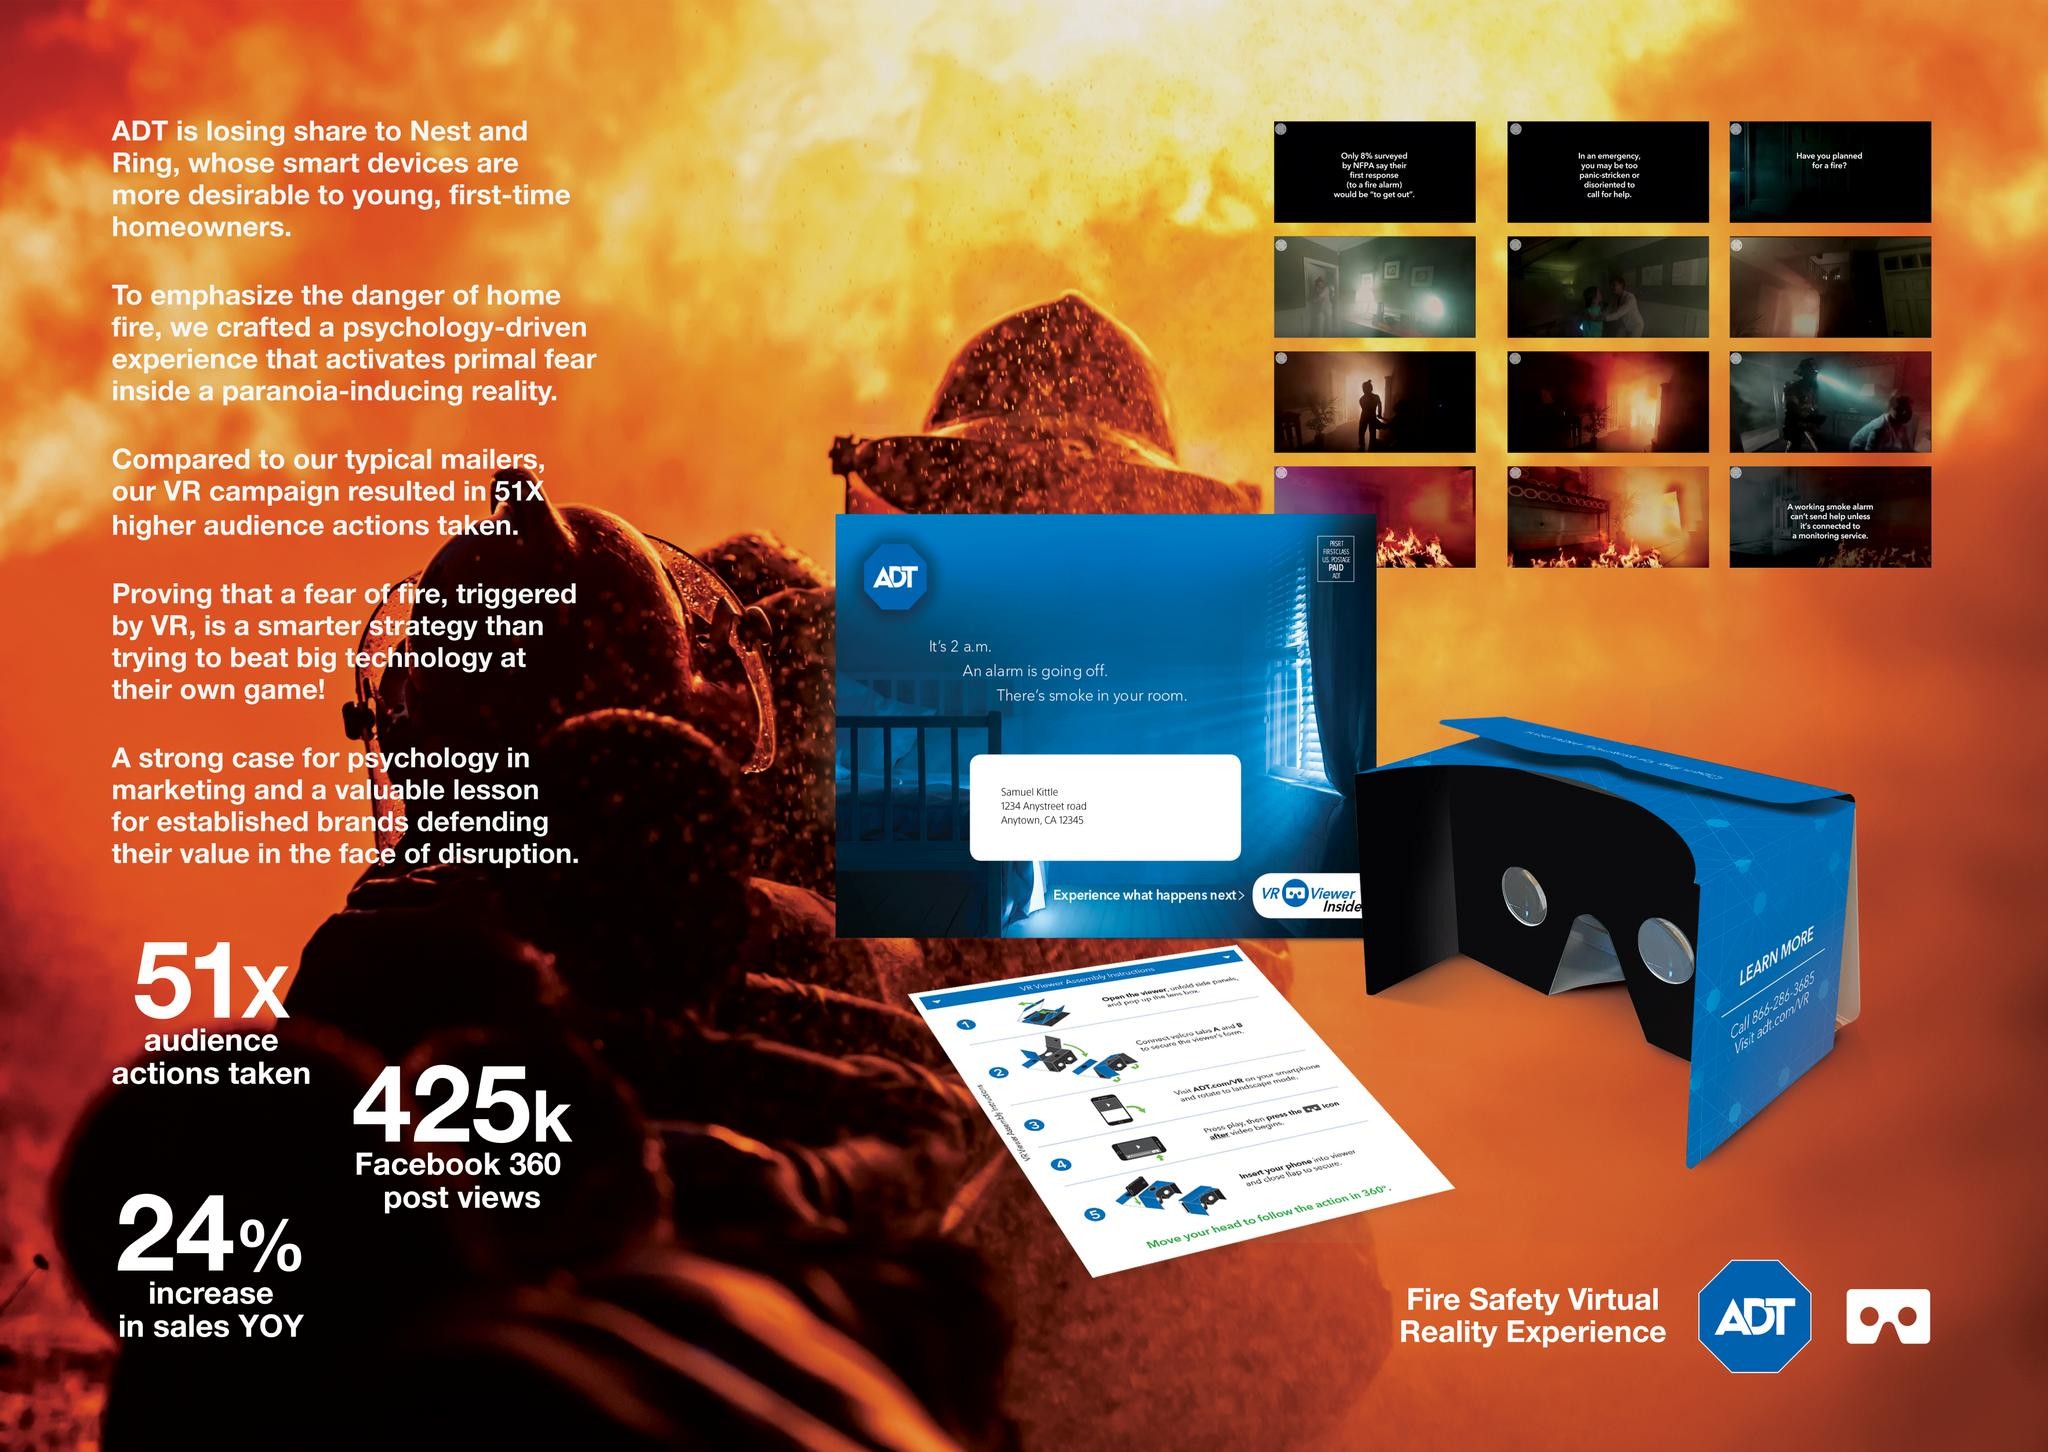 ADT Fire Safety Virtual Reality Experience